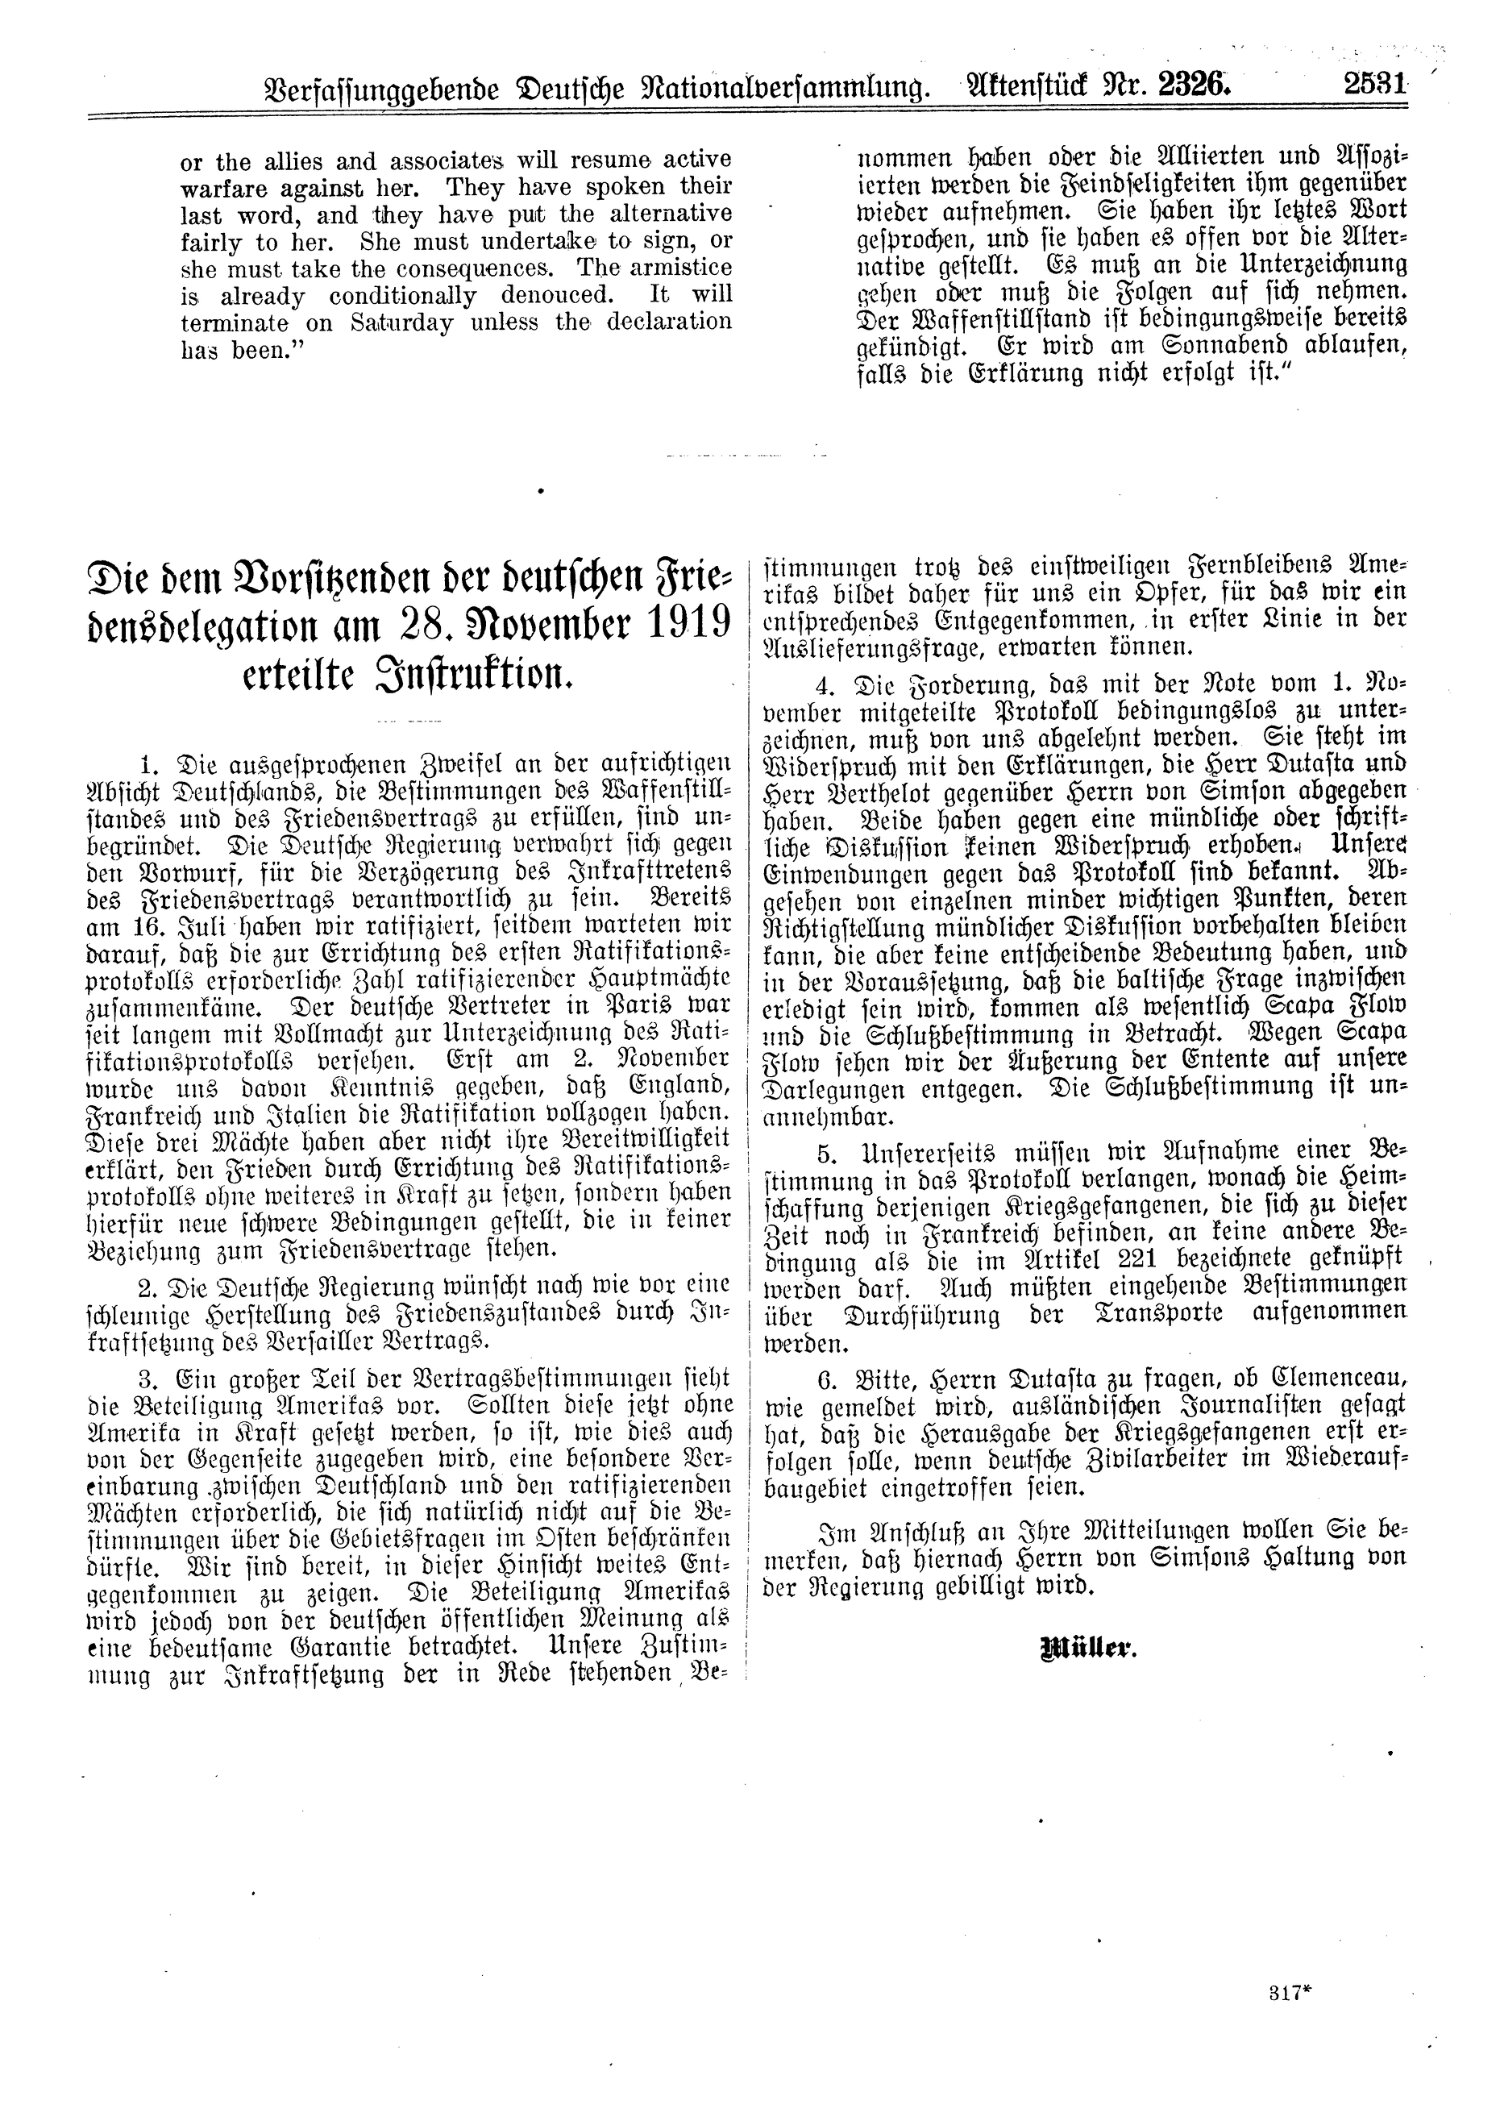 Scan of page 2531